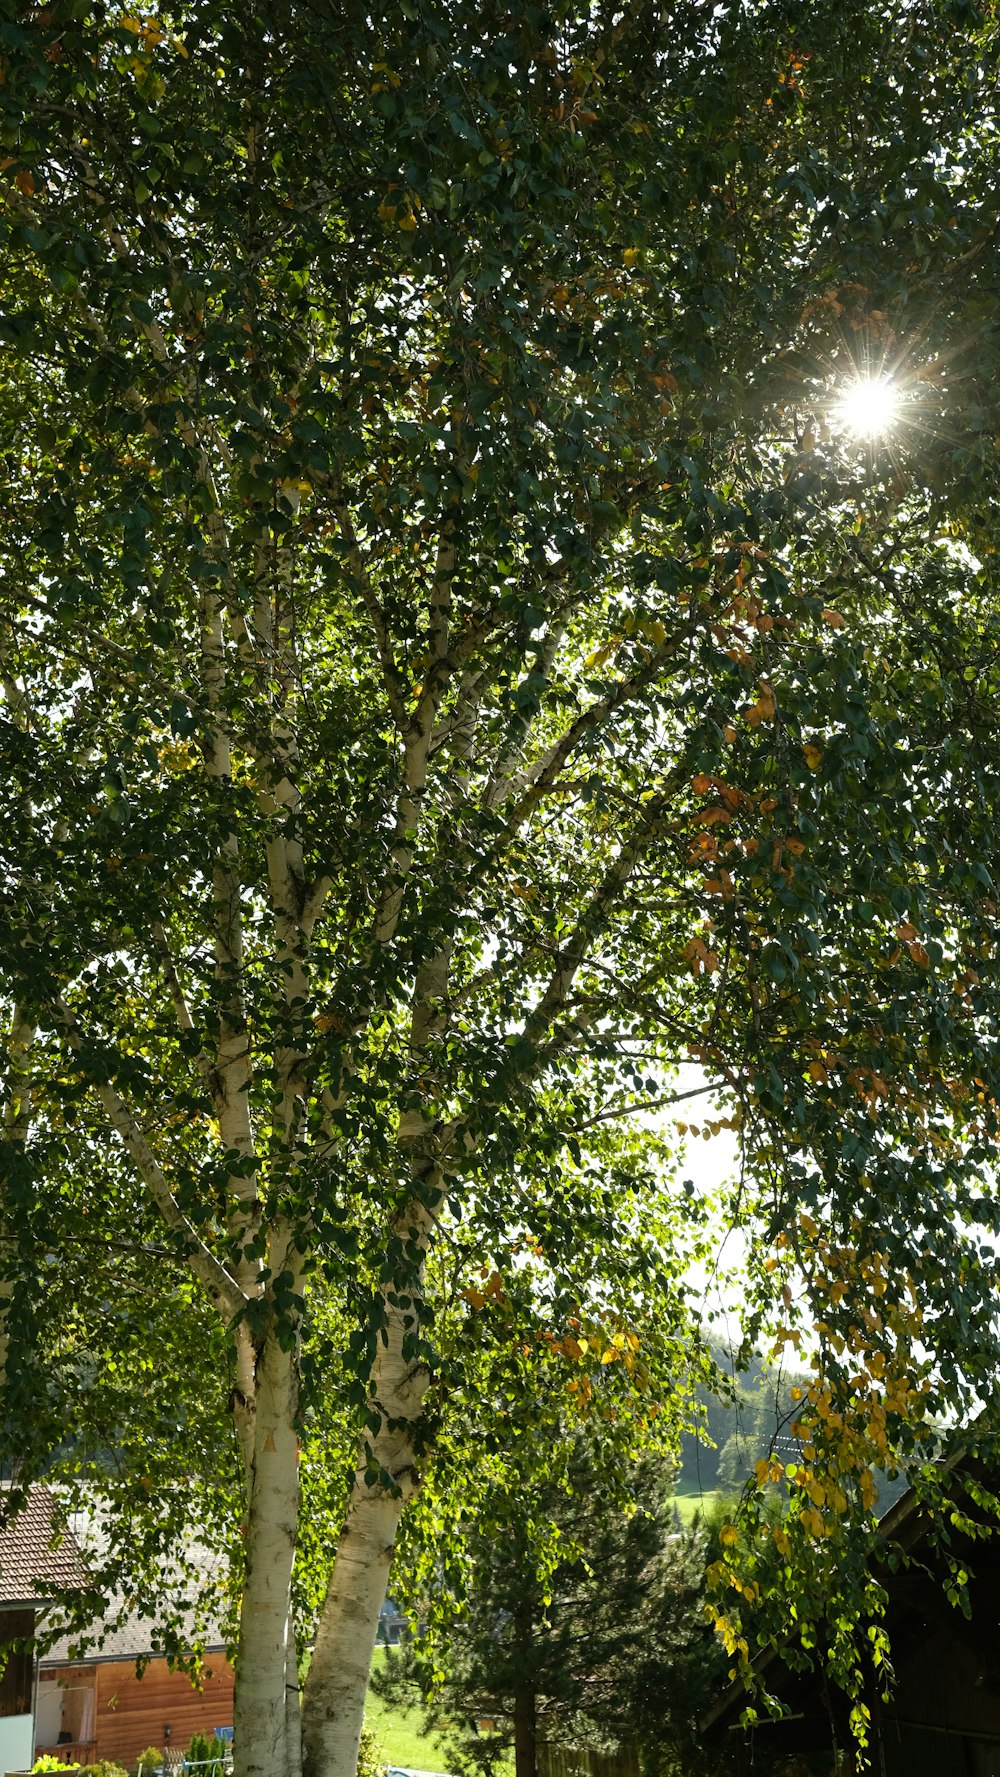 the sun shines through the leaves of a tree